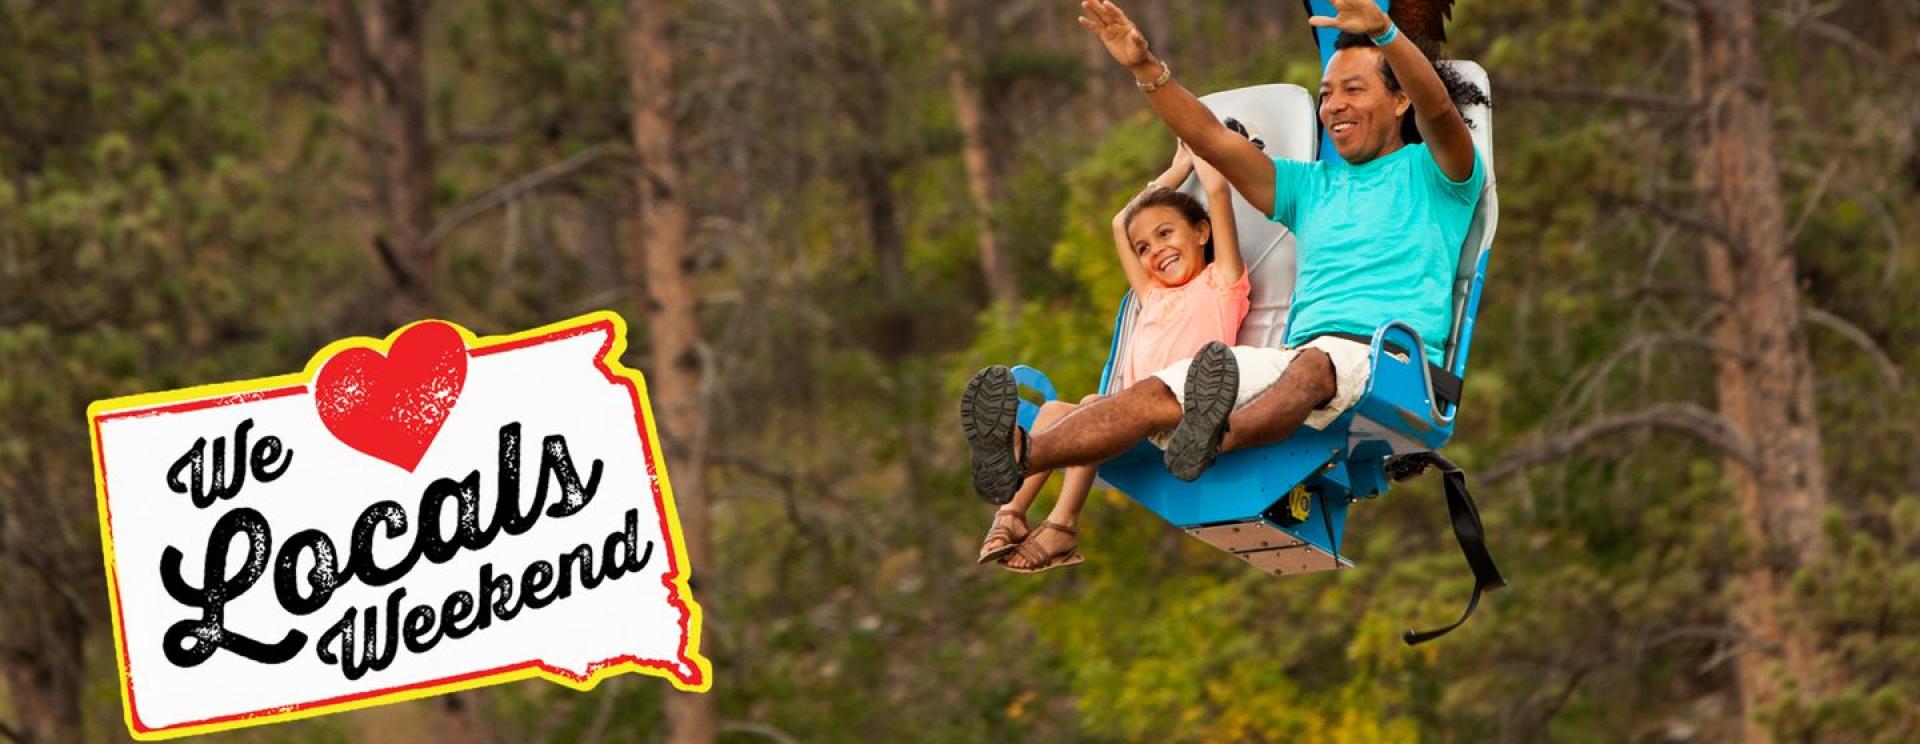 We Love Locals Weekend at Rush Mountain Adventure Park